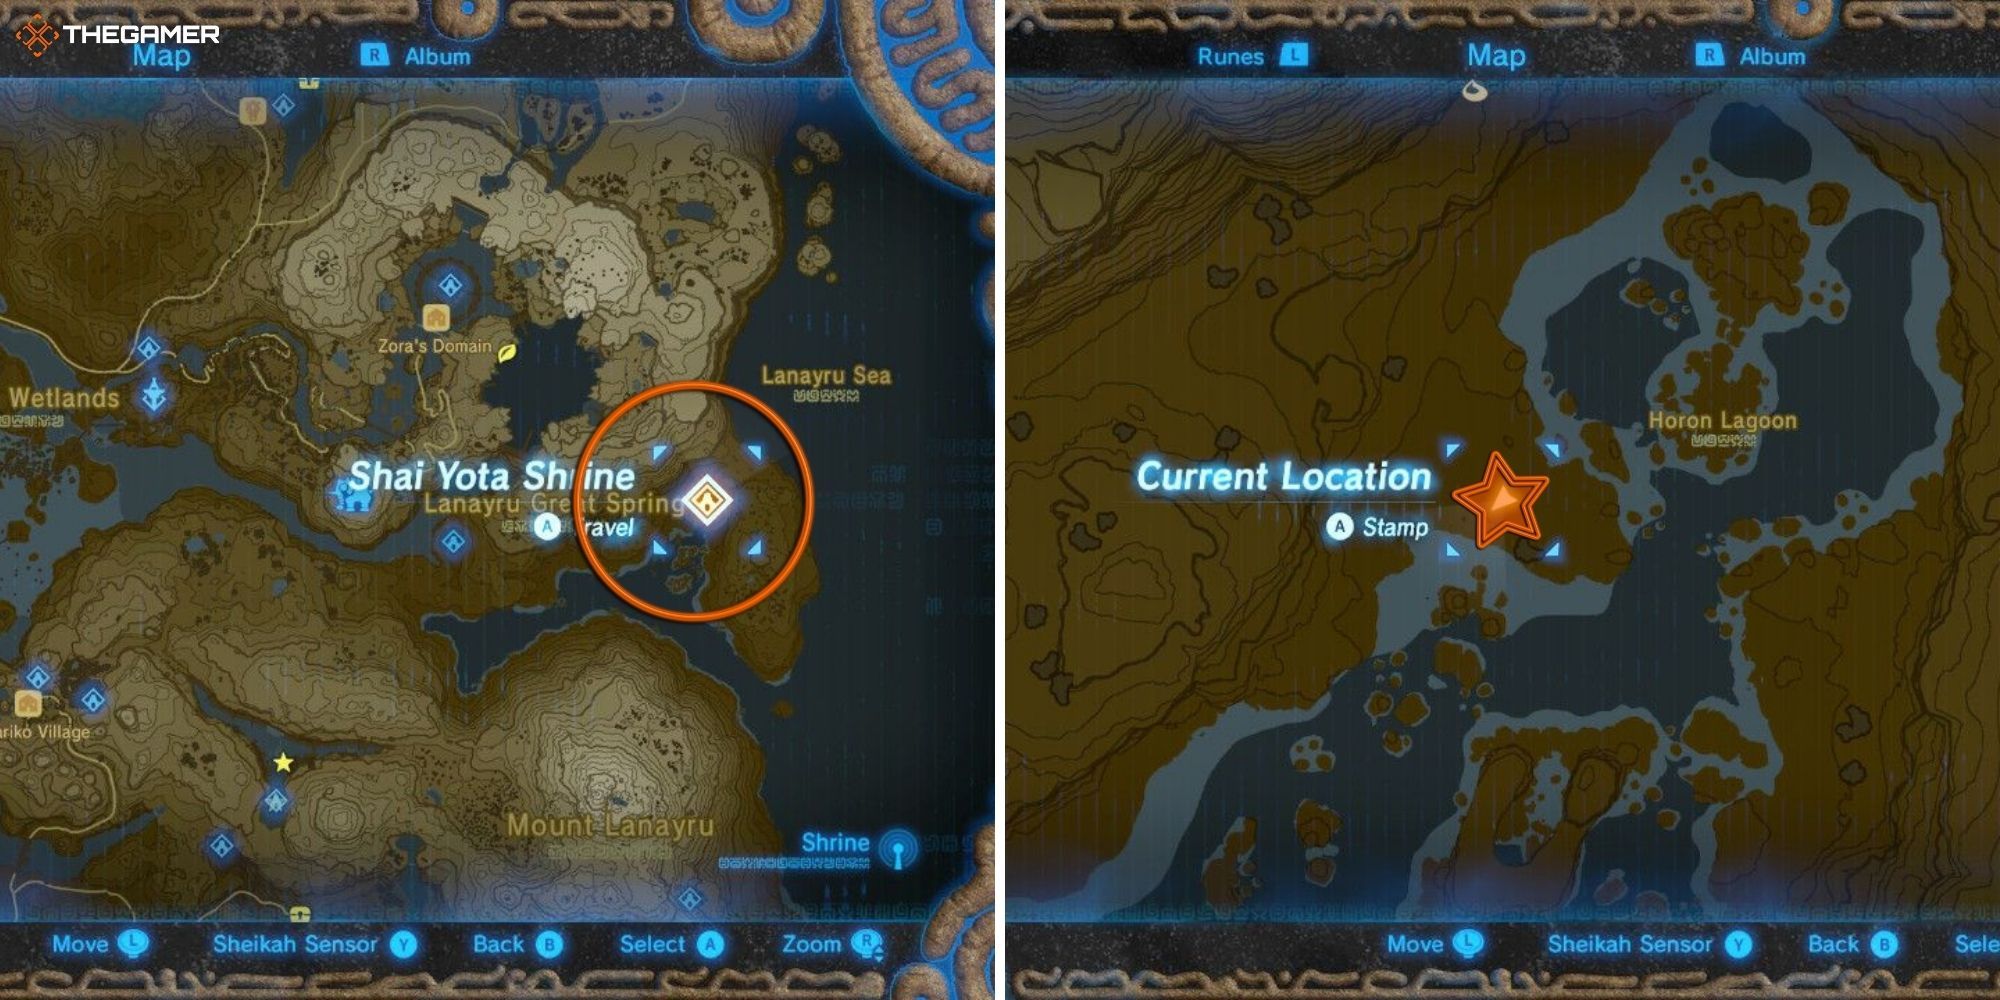 Map of Hyrule on left and right with location of Kas for Master of the Wind Quest marked